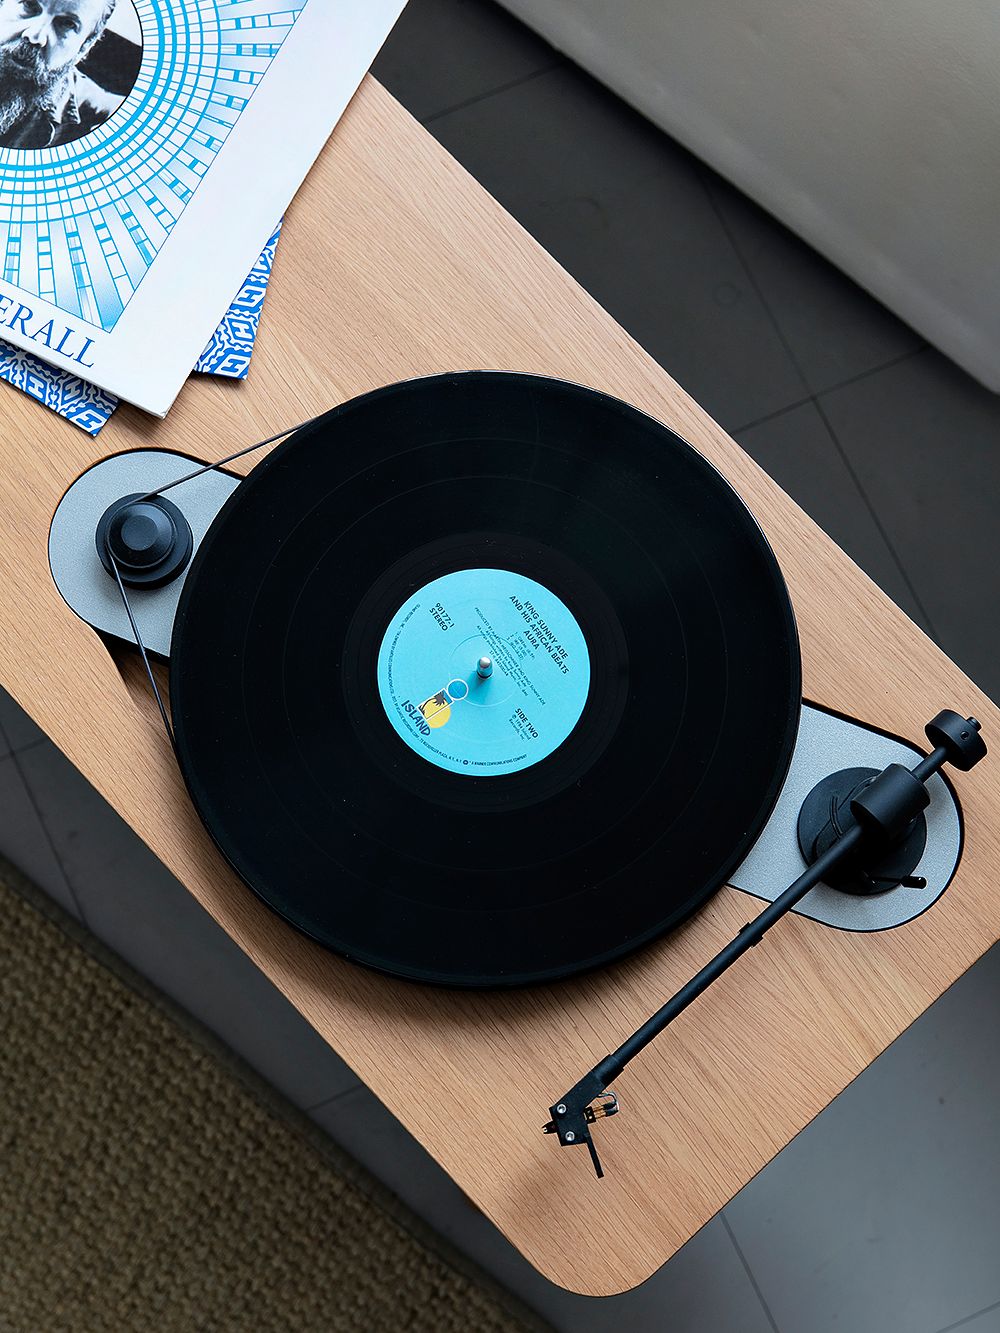 Wooden Turntable record player by Harri Koskinen